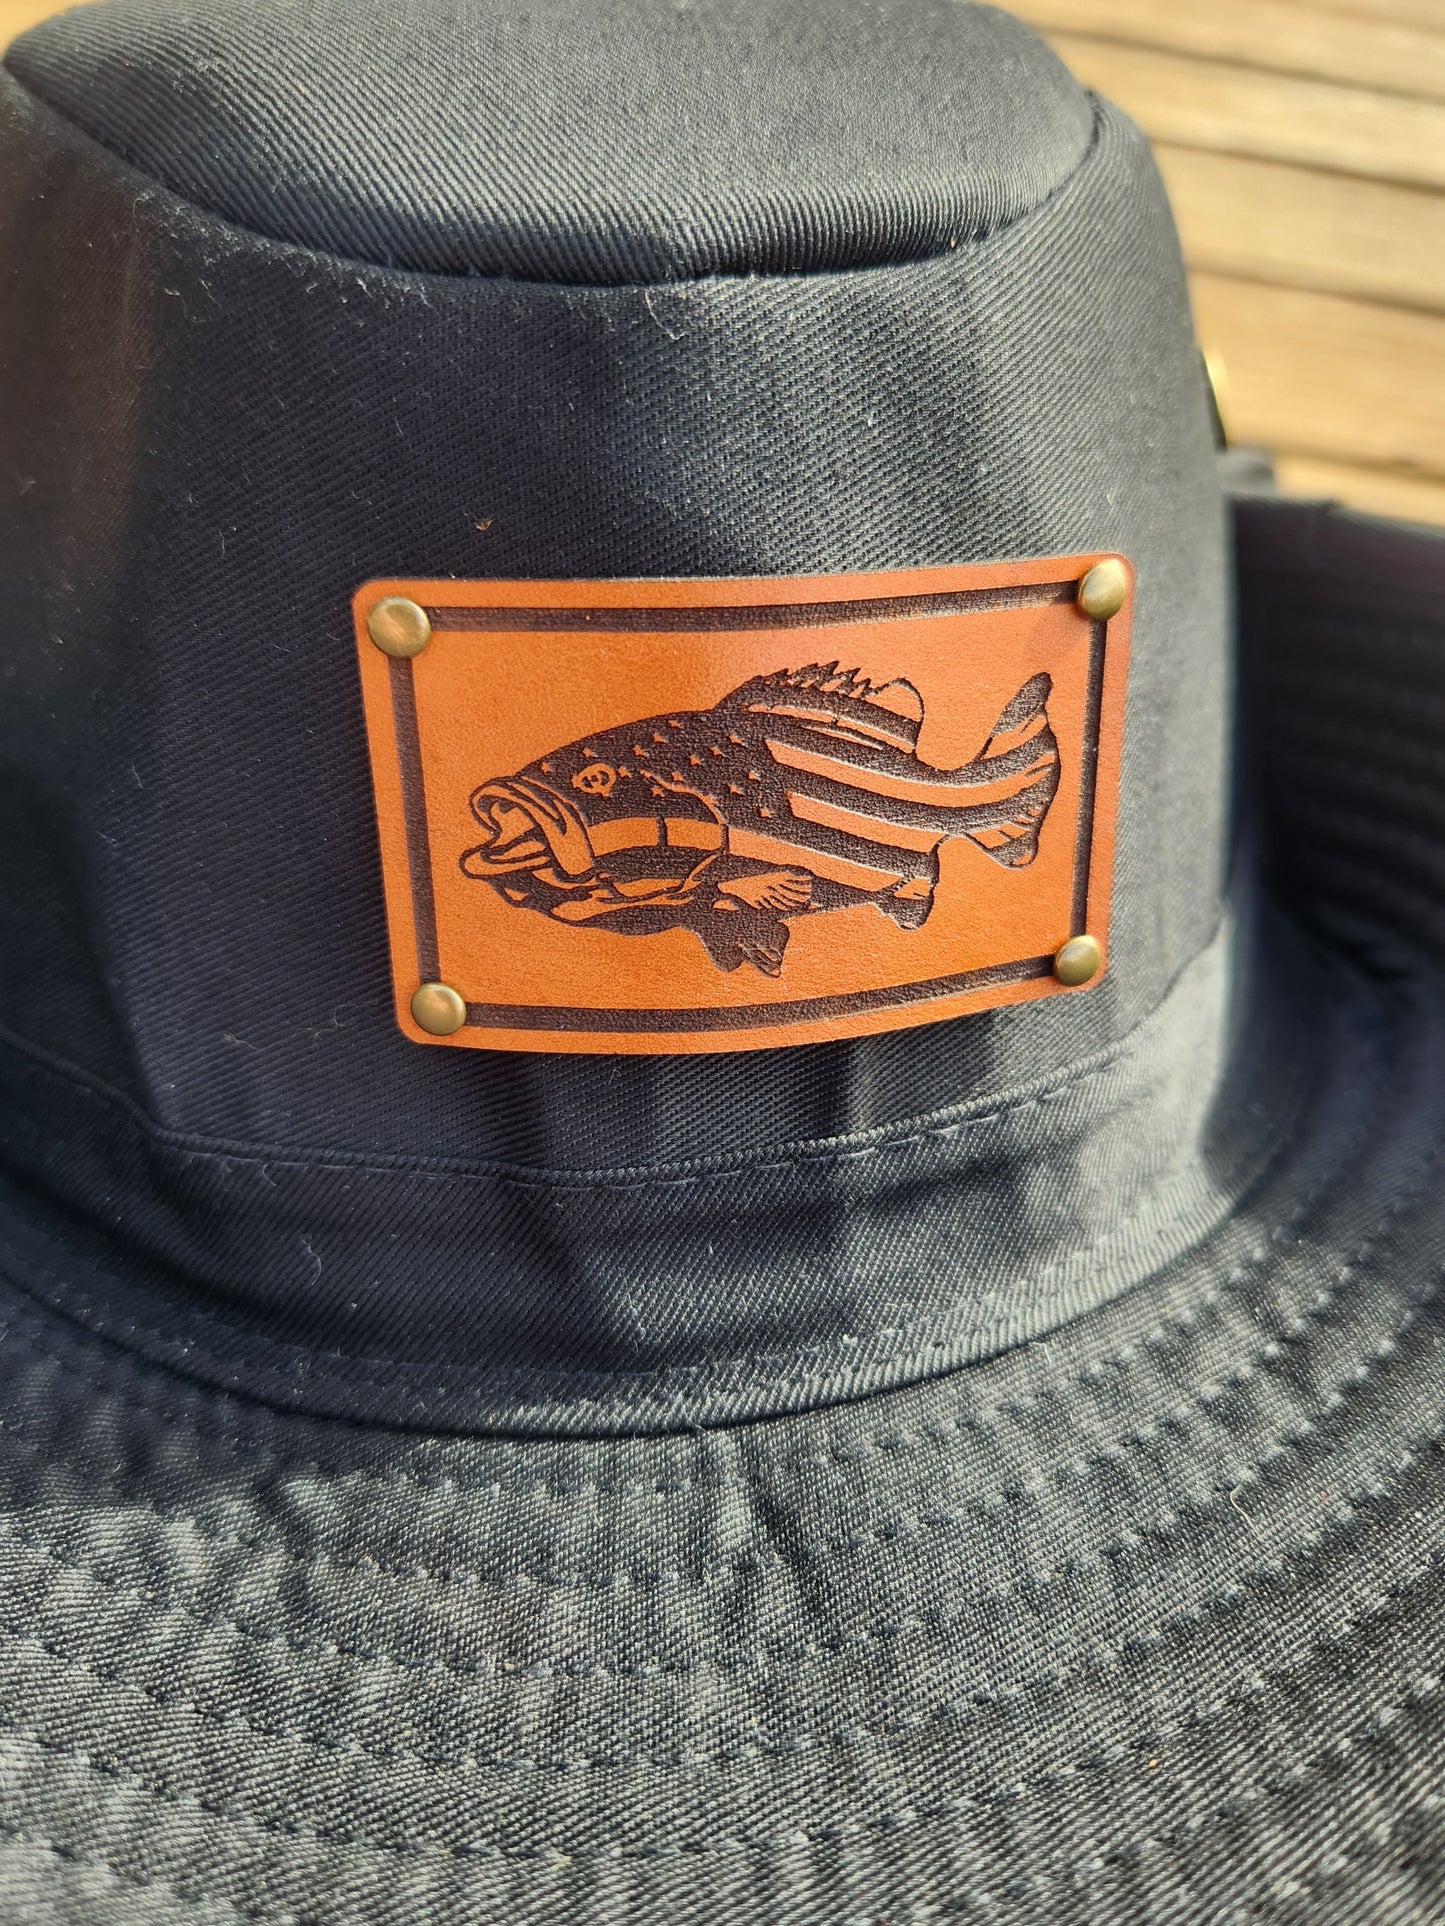 Bass Fish Boonie hat - Adjustable Outback hat with neck protection